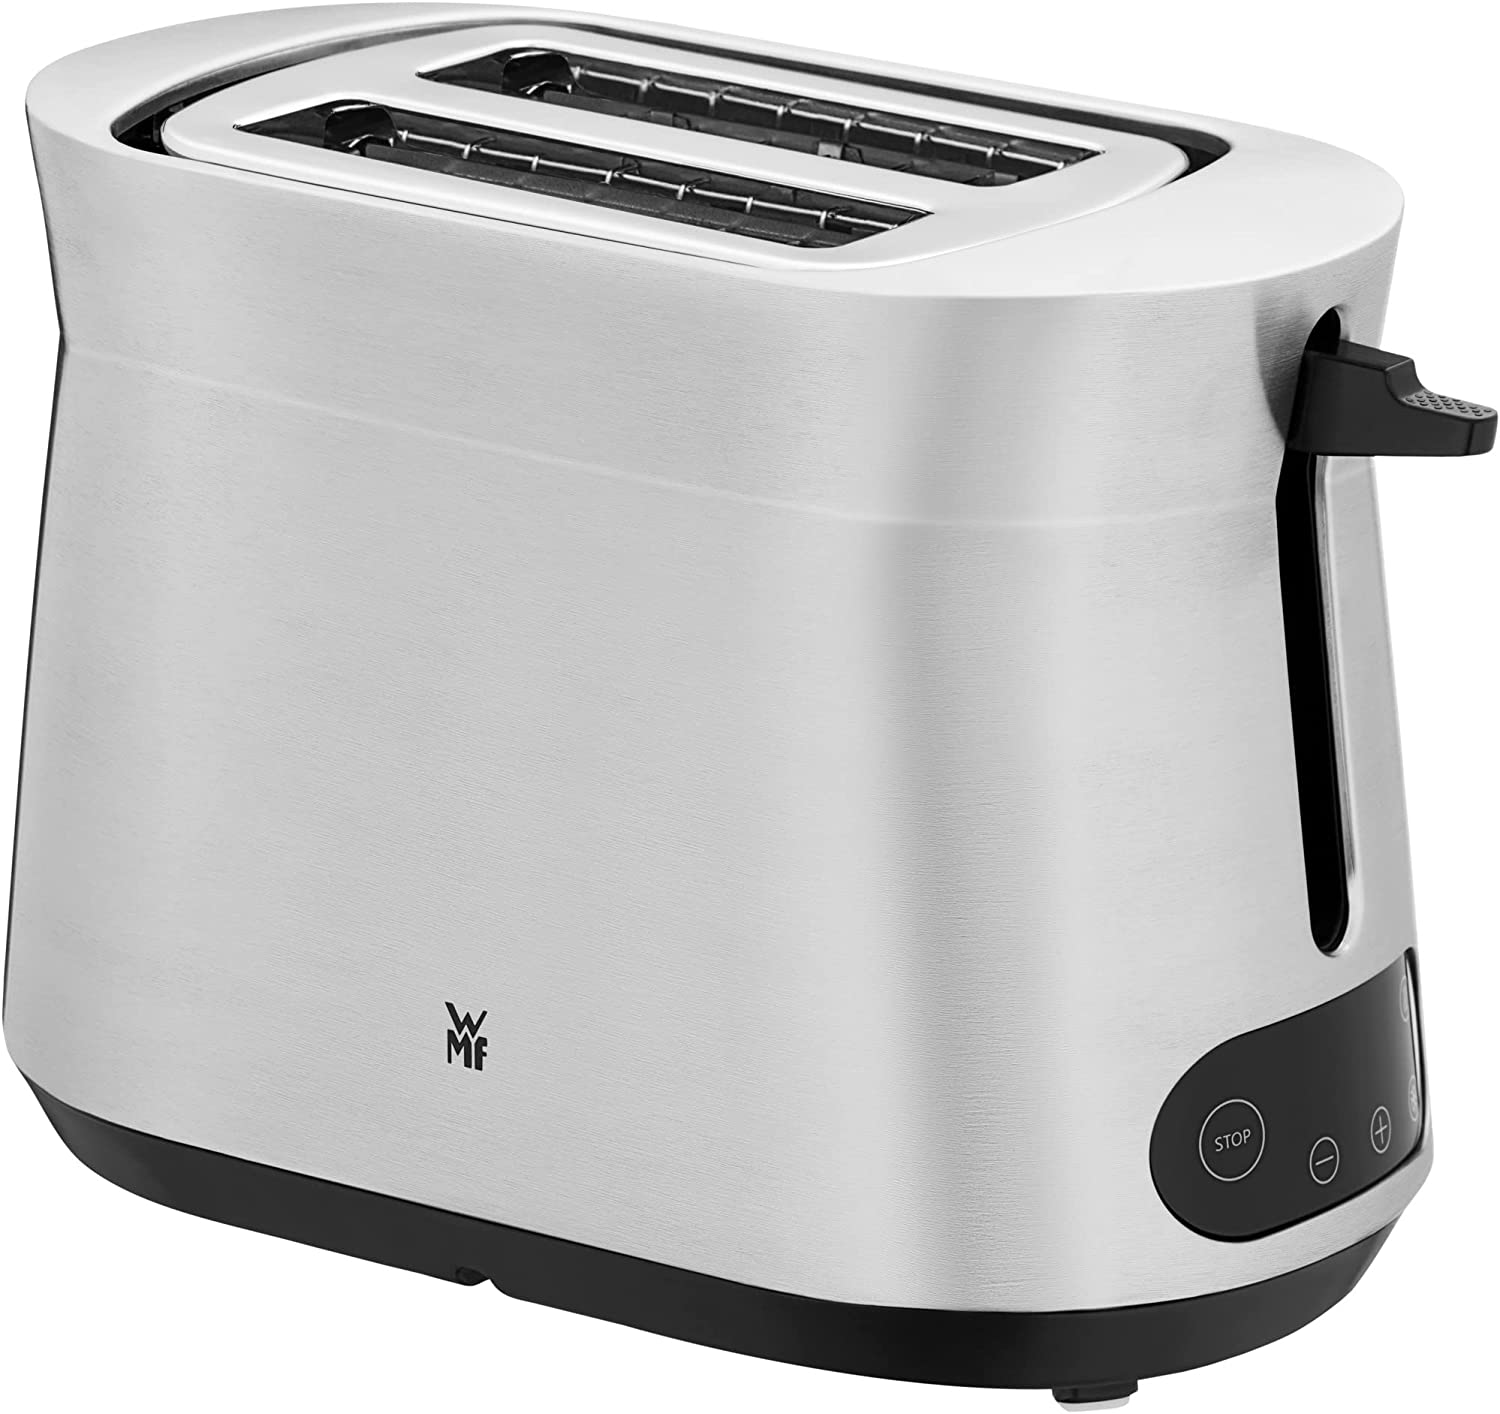 WMF Kineo Stainless Steel Toaster, Double Slot Toaster with Bun Attachment, 2 Slices, 1 Browning Level, 98 W, Matte Stainless Steel